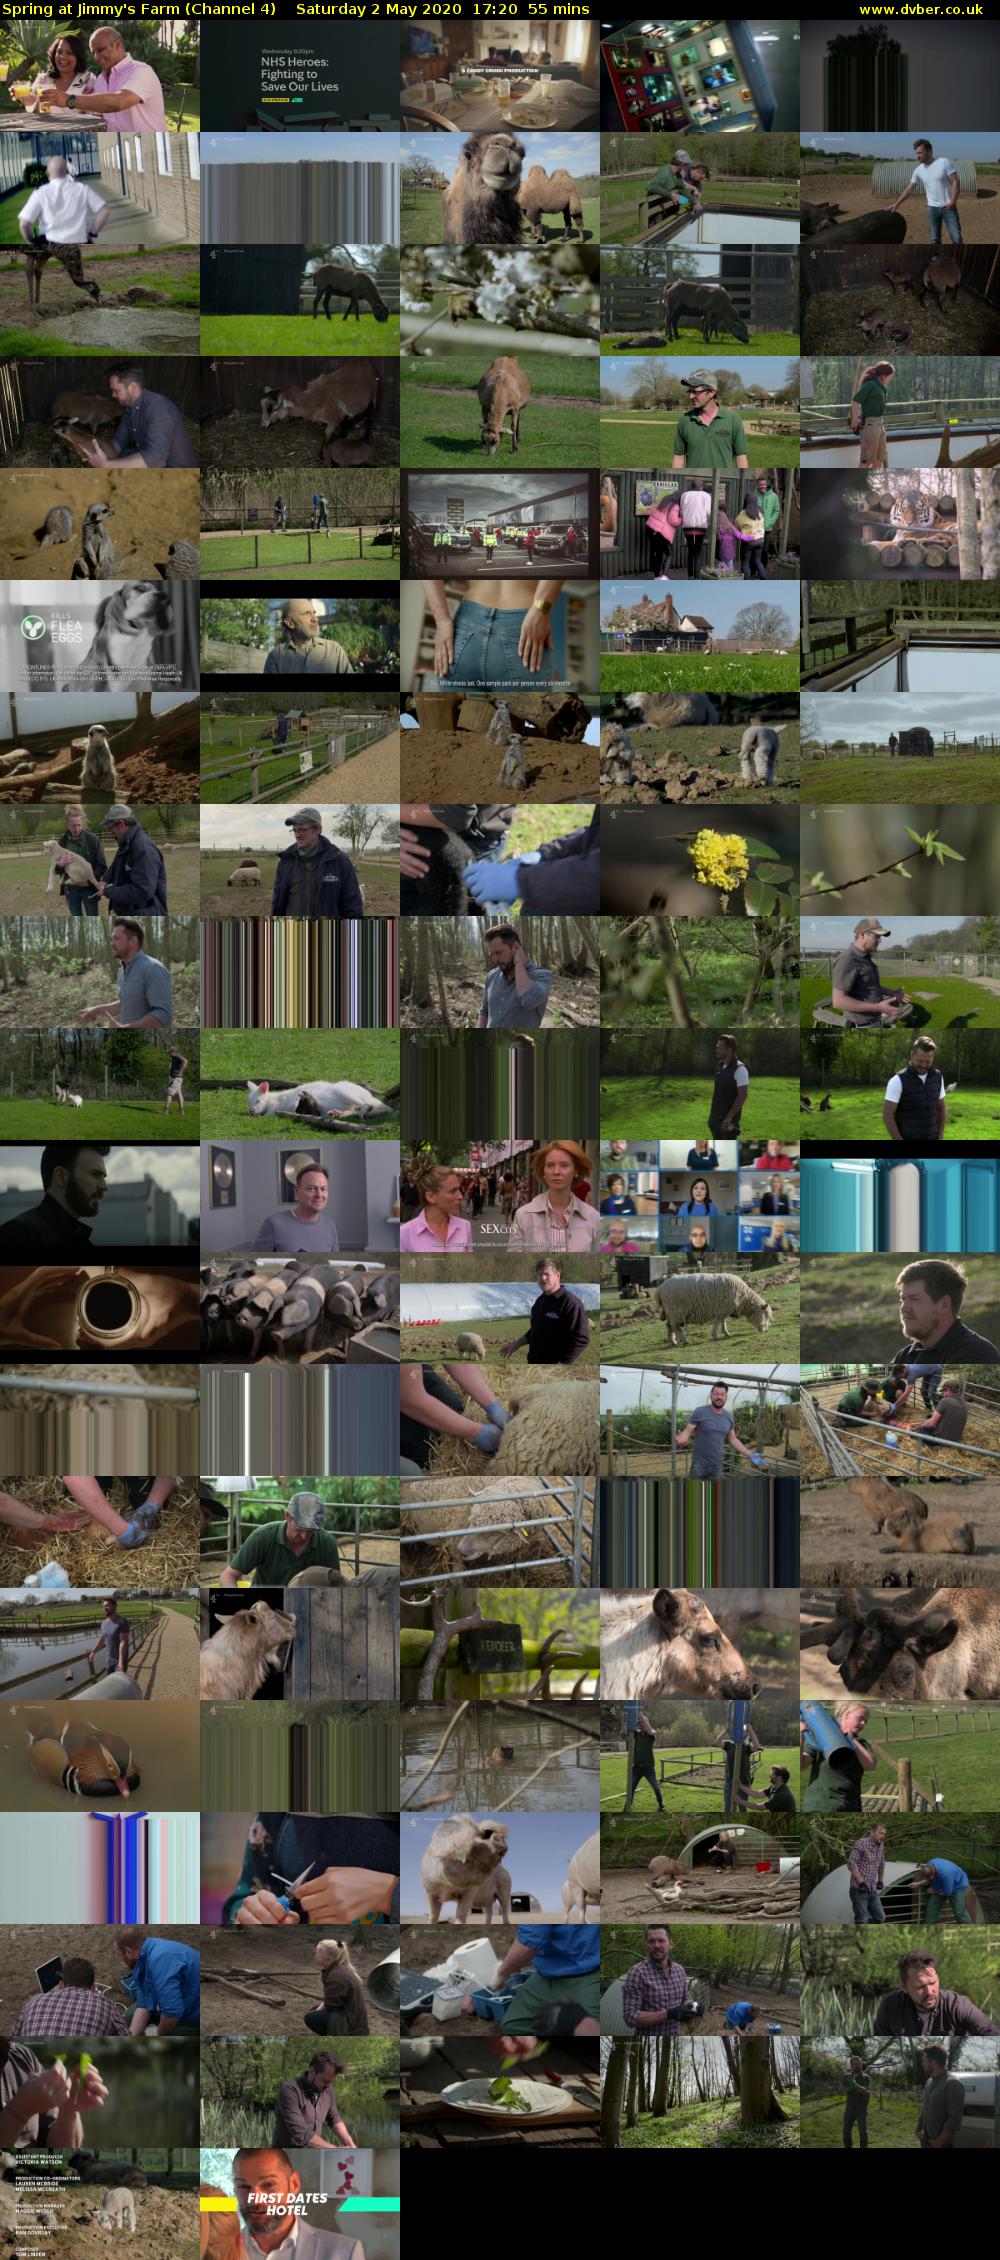 Spring at Jimmy's Farm (Channel 4) Saturday 2 May 2020 17:20 - 18:15